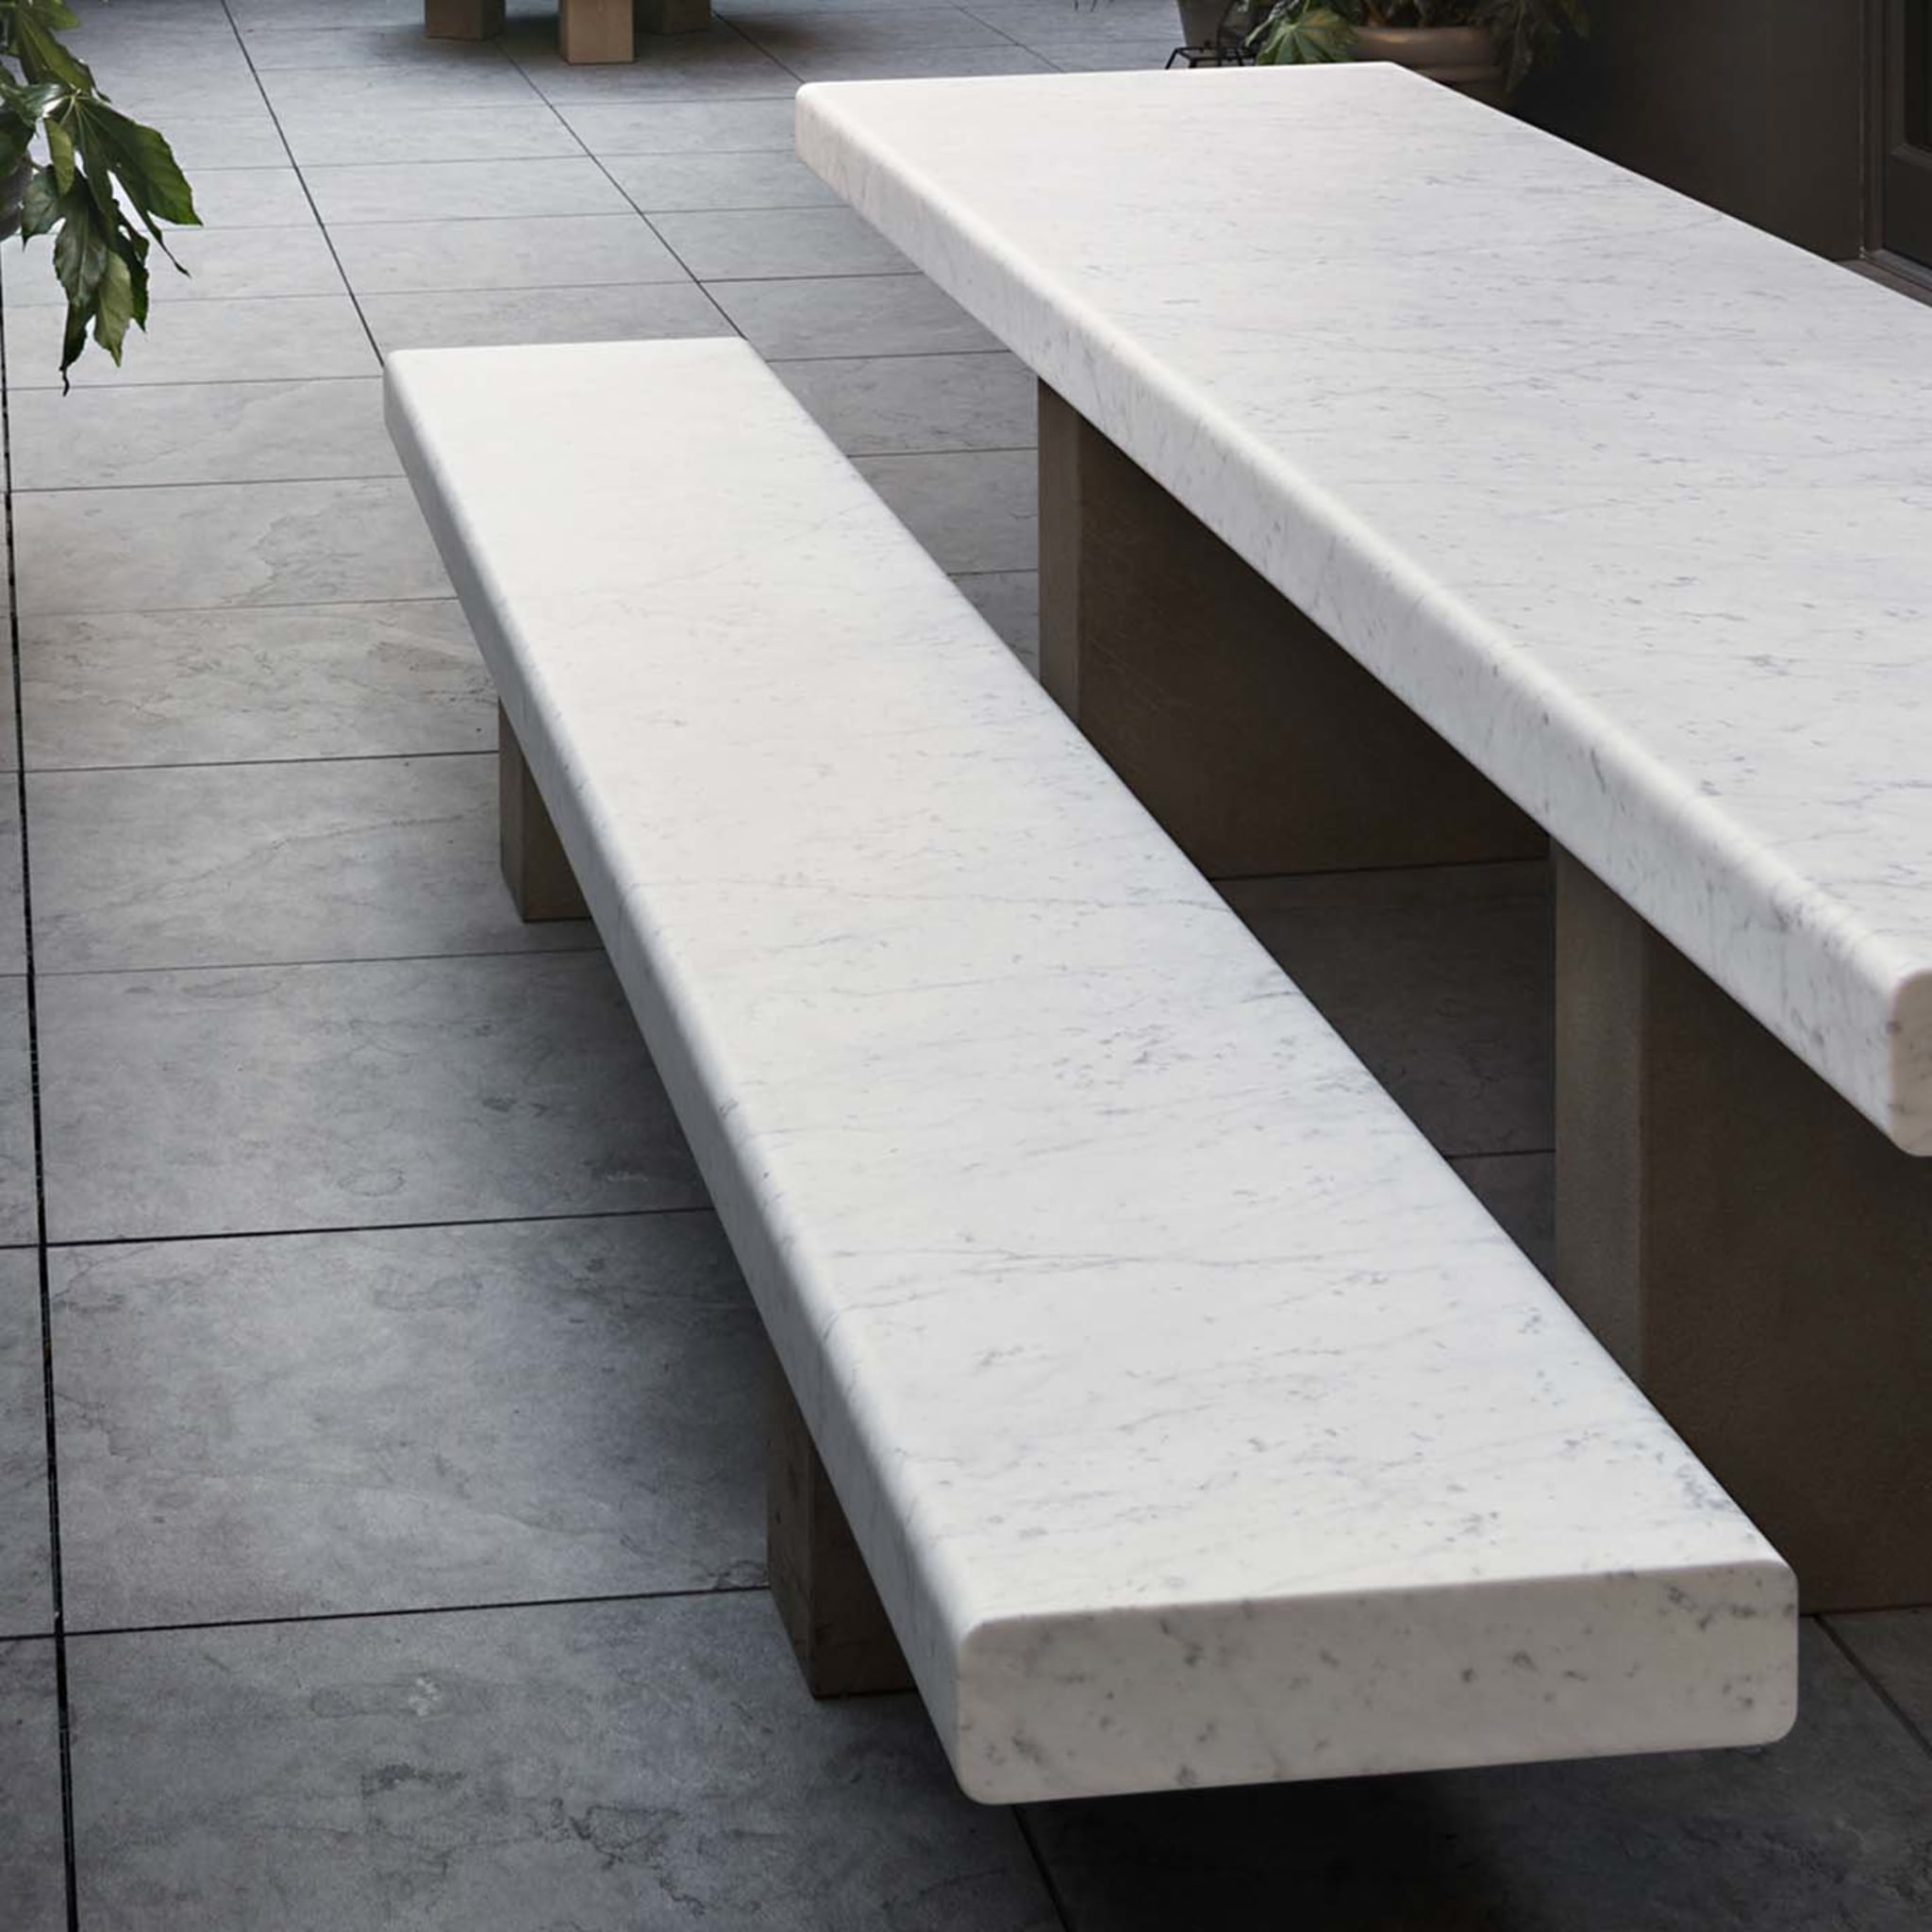 Span Outdoor Bench by John Pawson - Alternative view 3